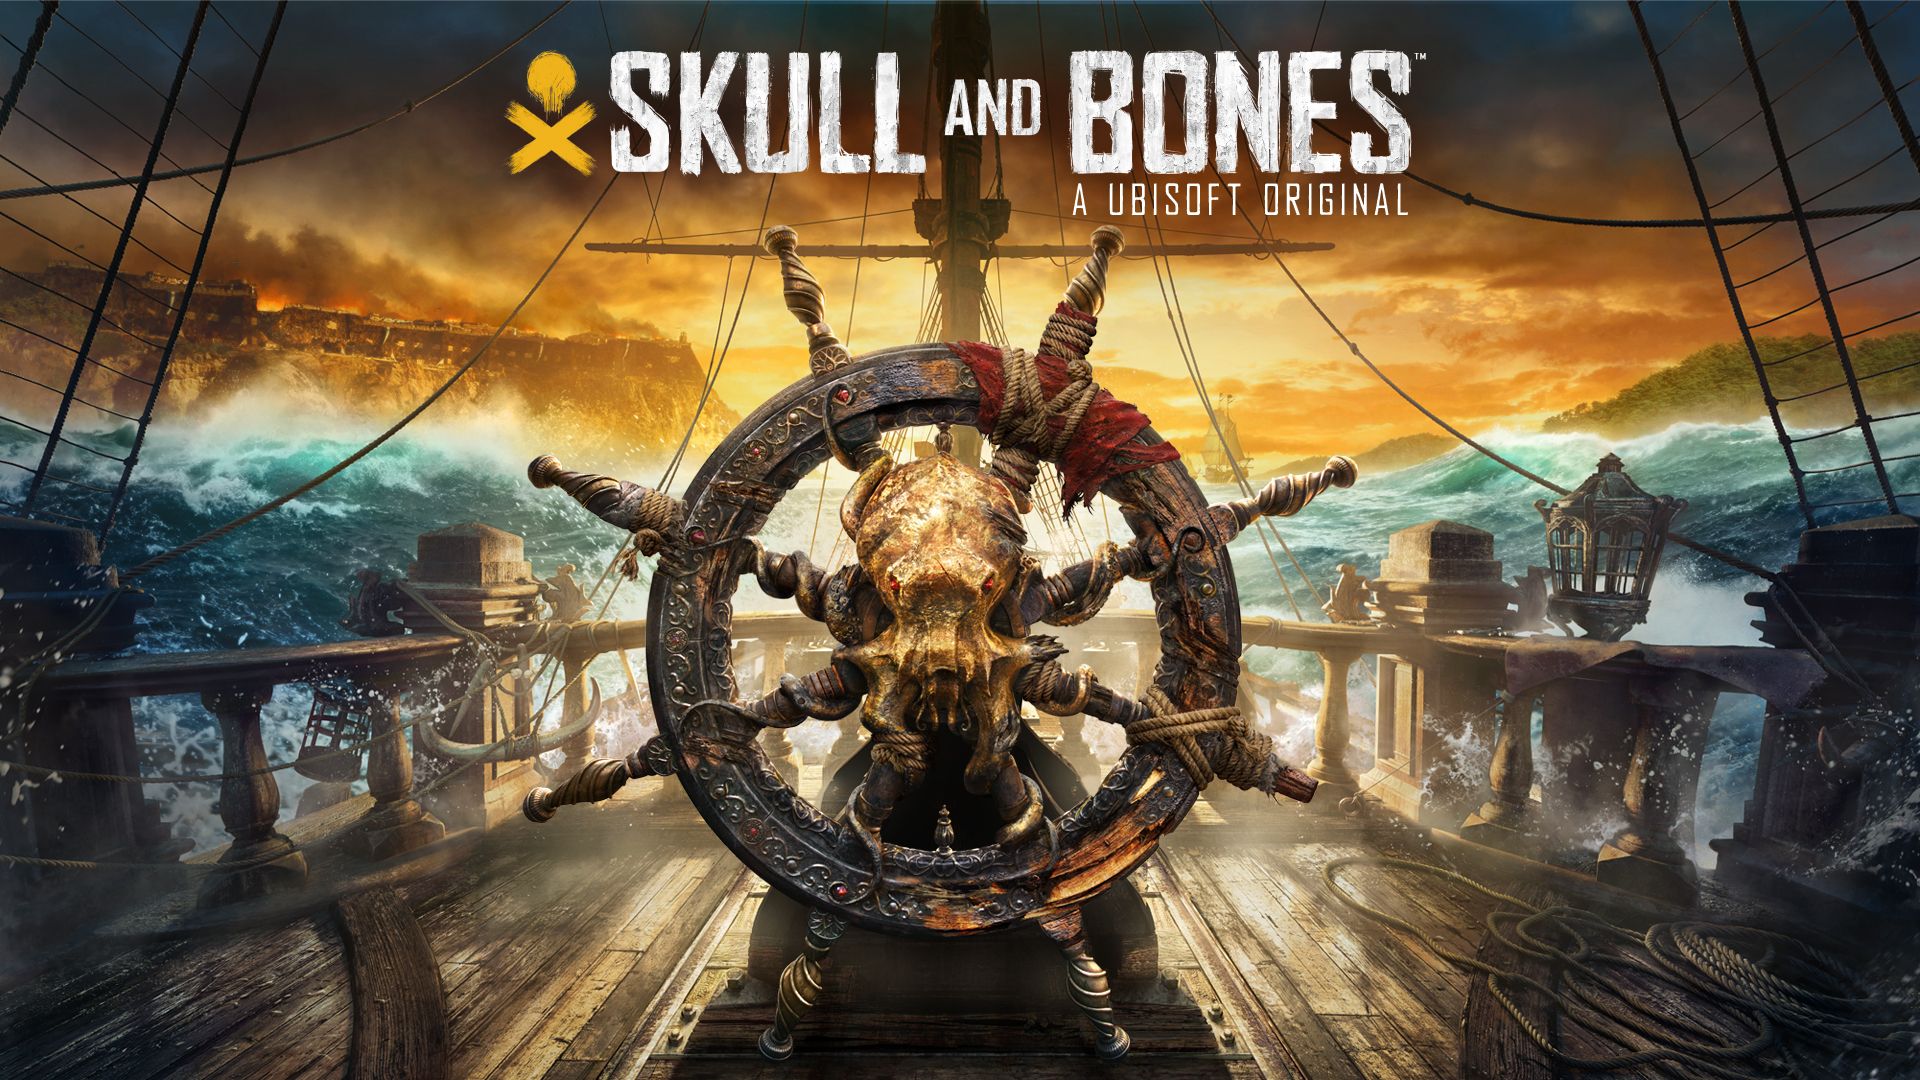 Skull and Bones gets delayed again, Ubisoft also cancels 3 unannounced games